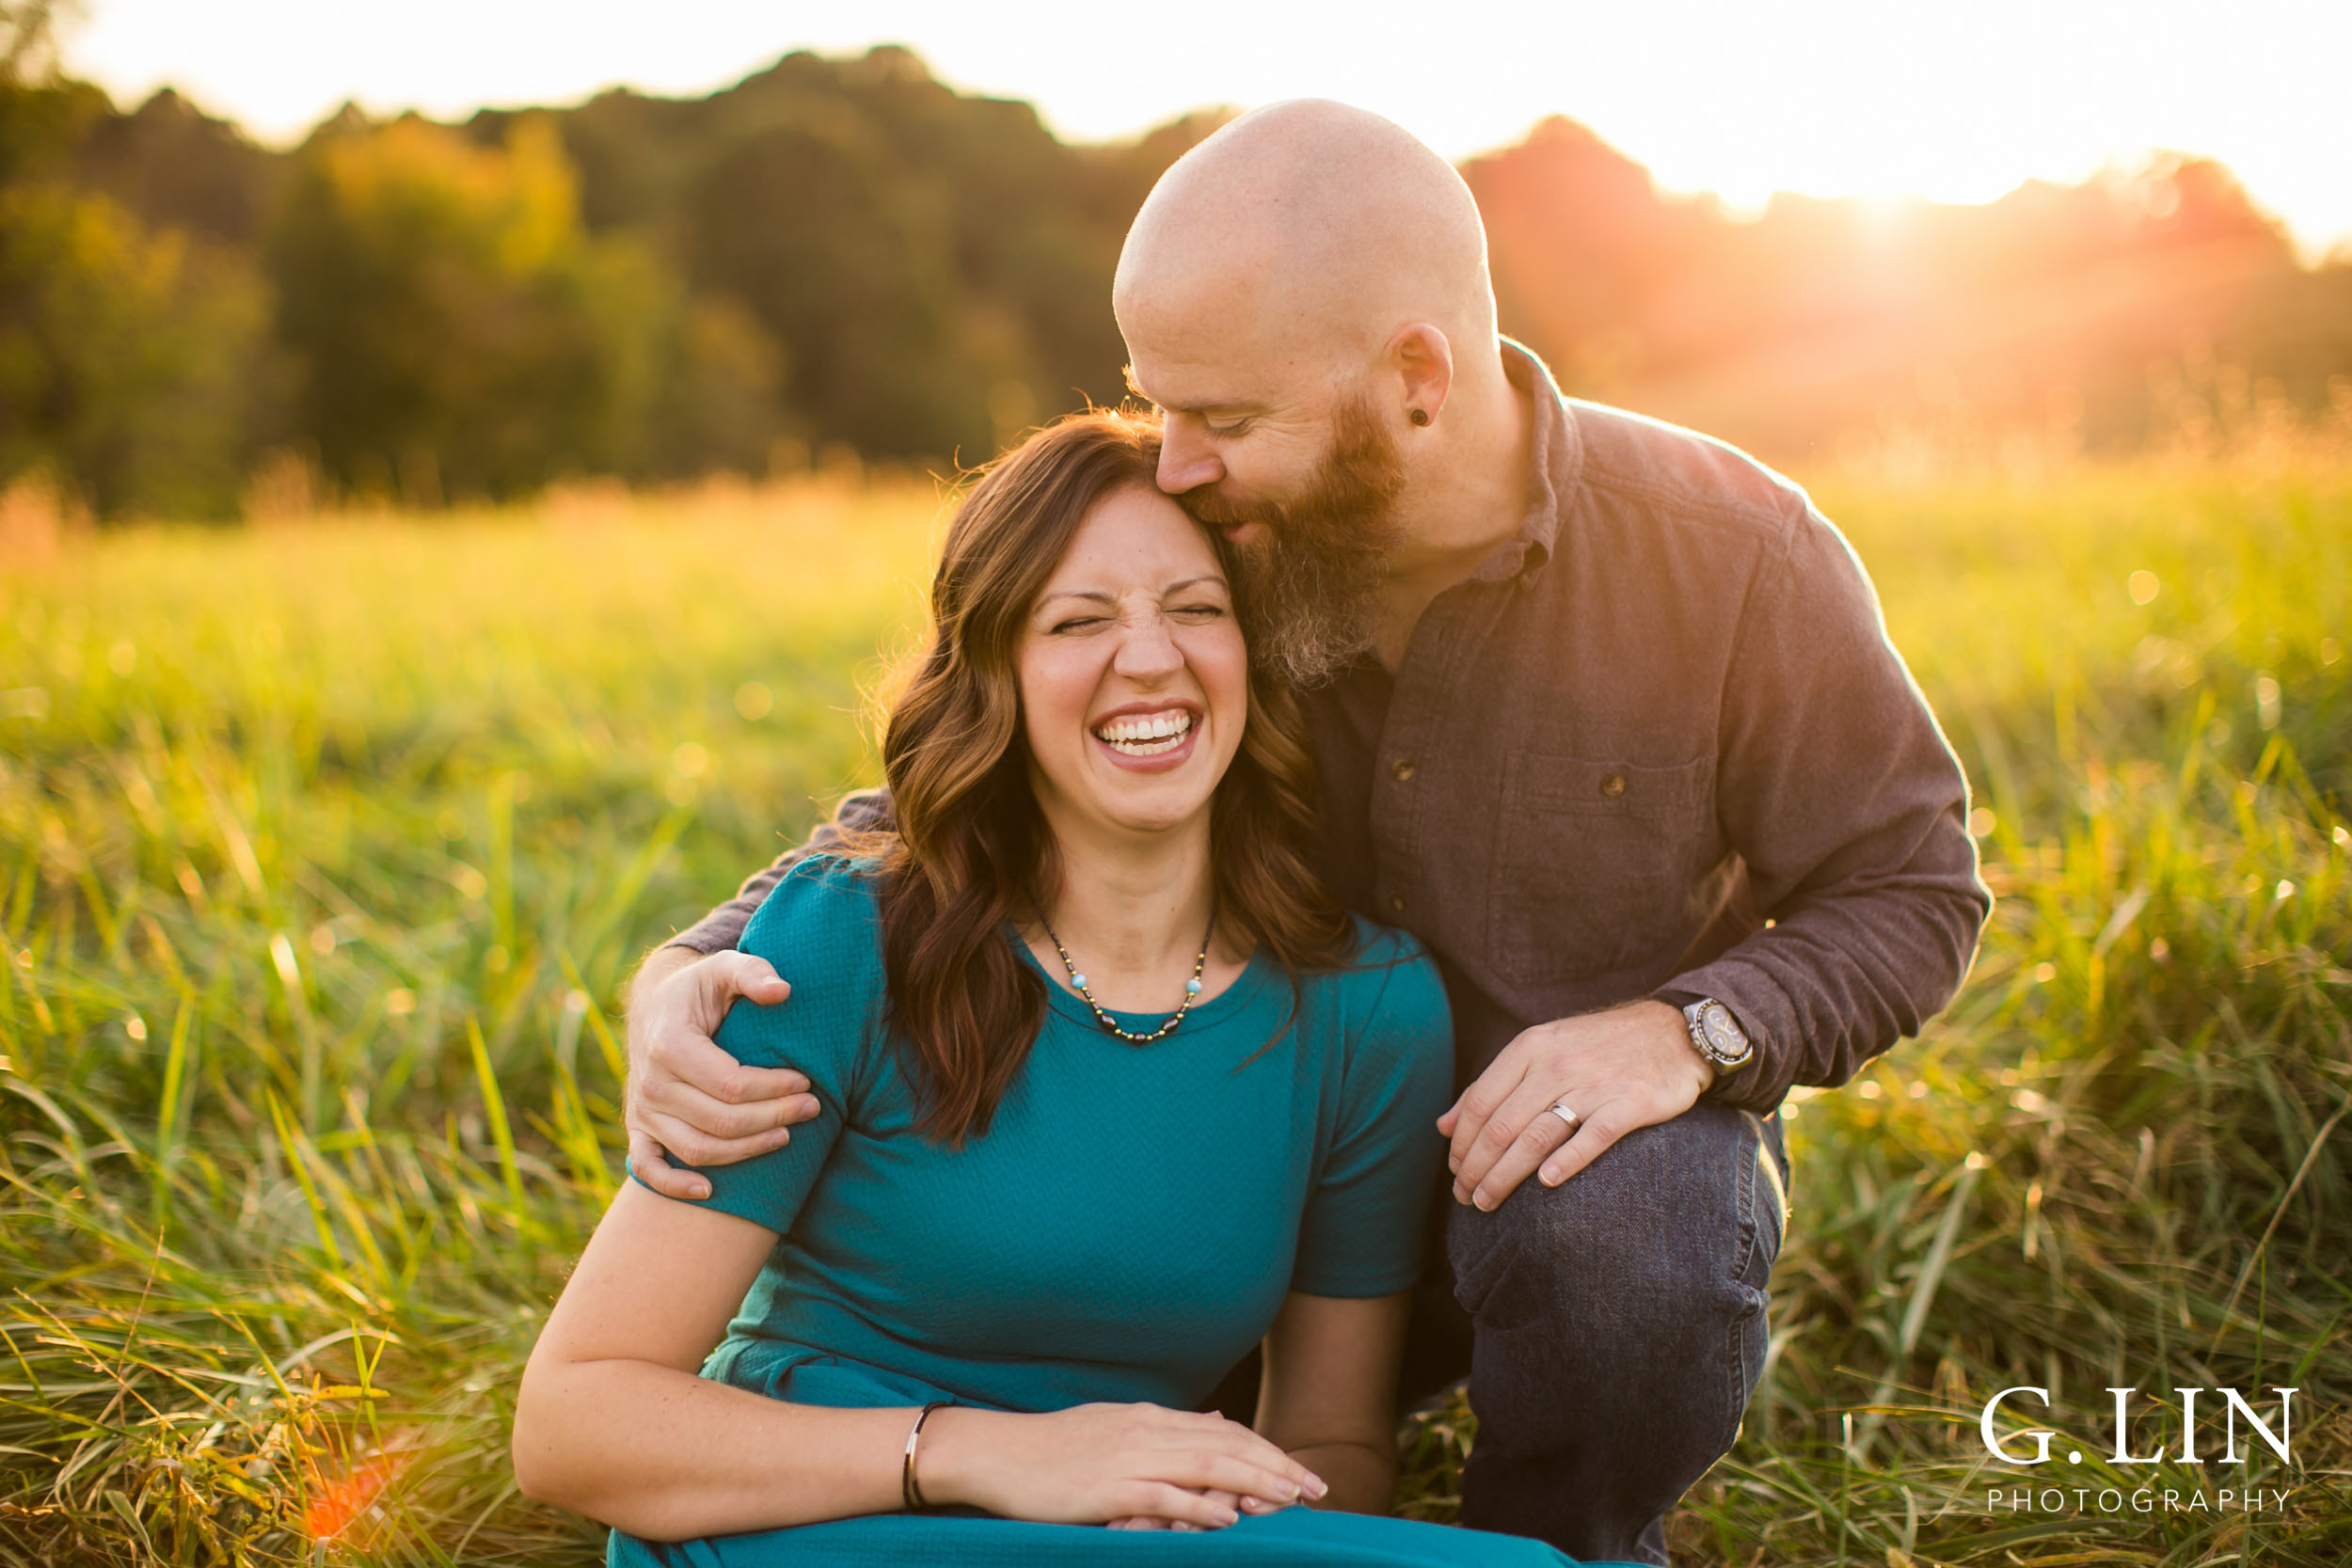 Raleigh Family Photographer | G. Lin Photography | Husband kissing wife's head